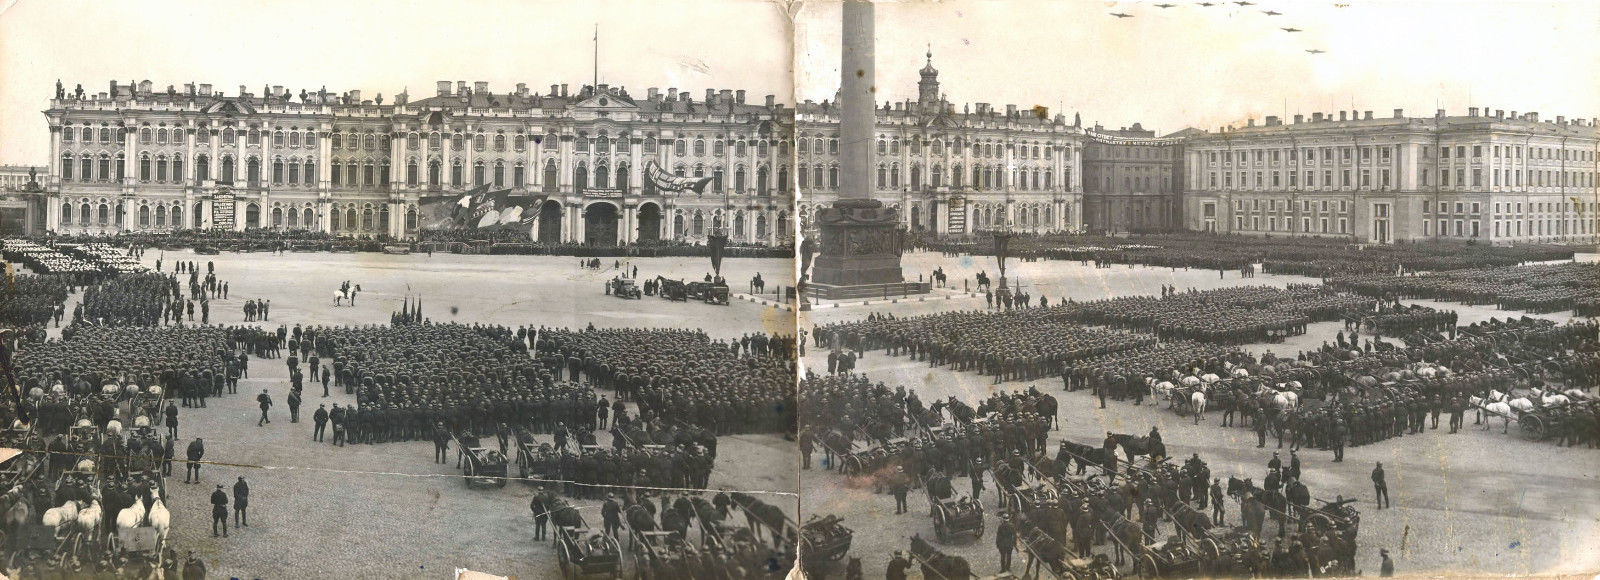 Organized columns of workers paraded in the streets of towns and cities, with music and political slogans relayed through loudspeakers. /  Panoramic view. May 1, 1930 in Leningrad (now St. Petersburg)